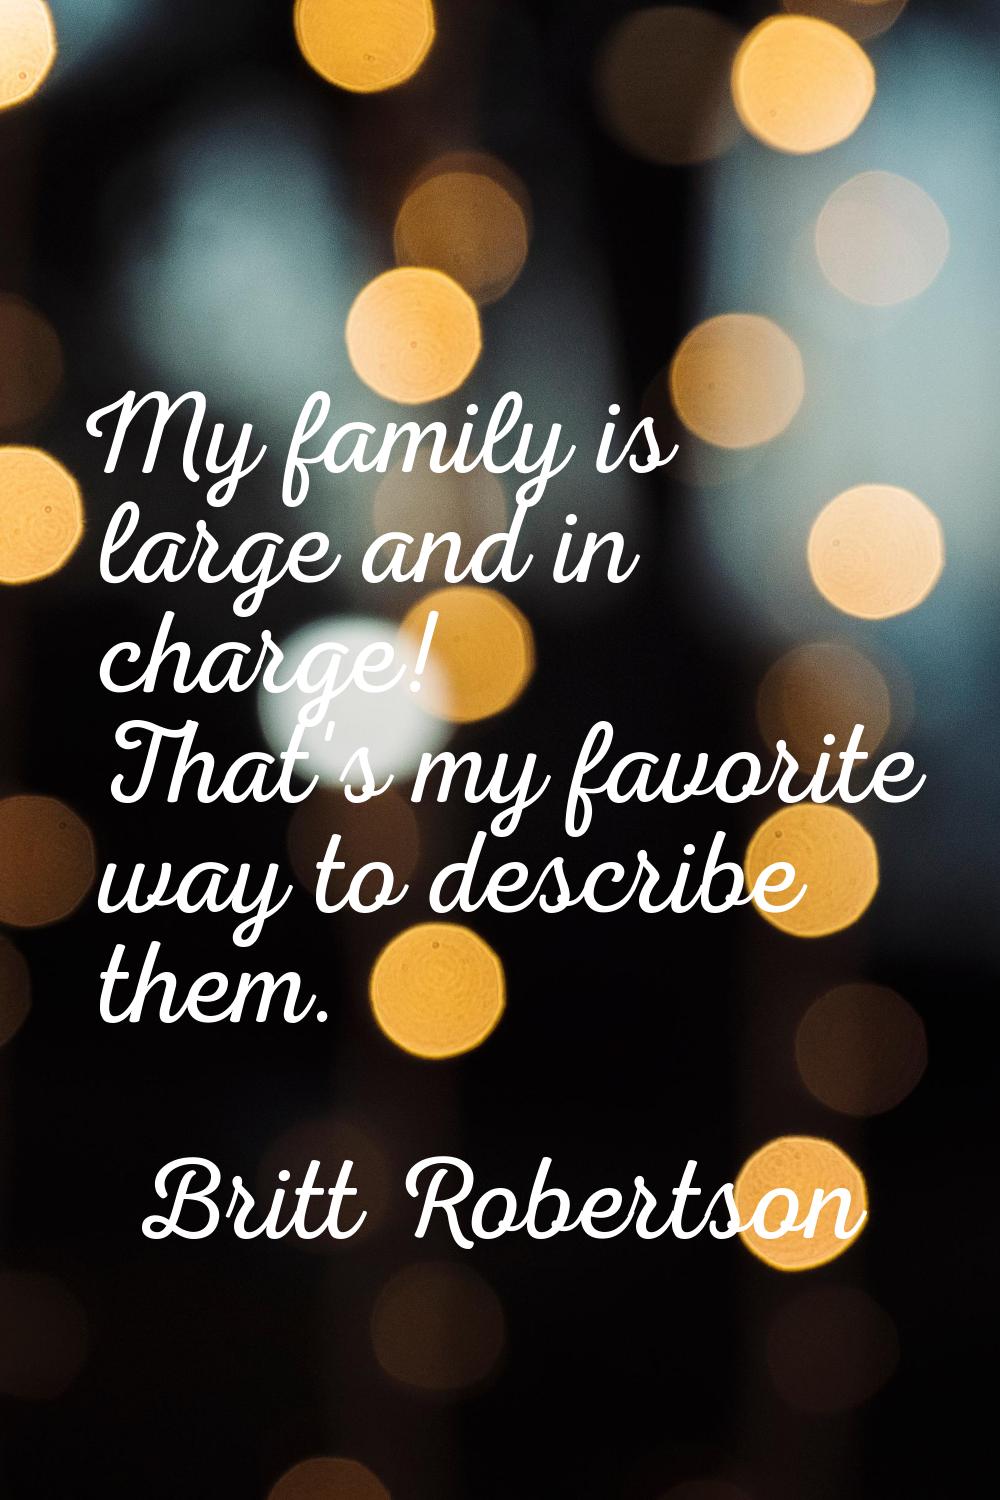 My family is large and in charge! That's my favorite way to describe them.